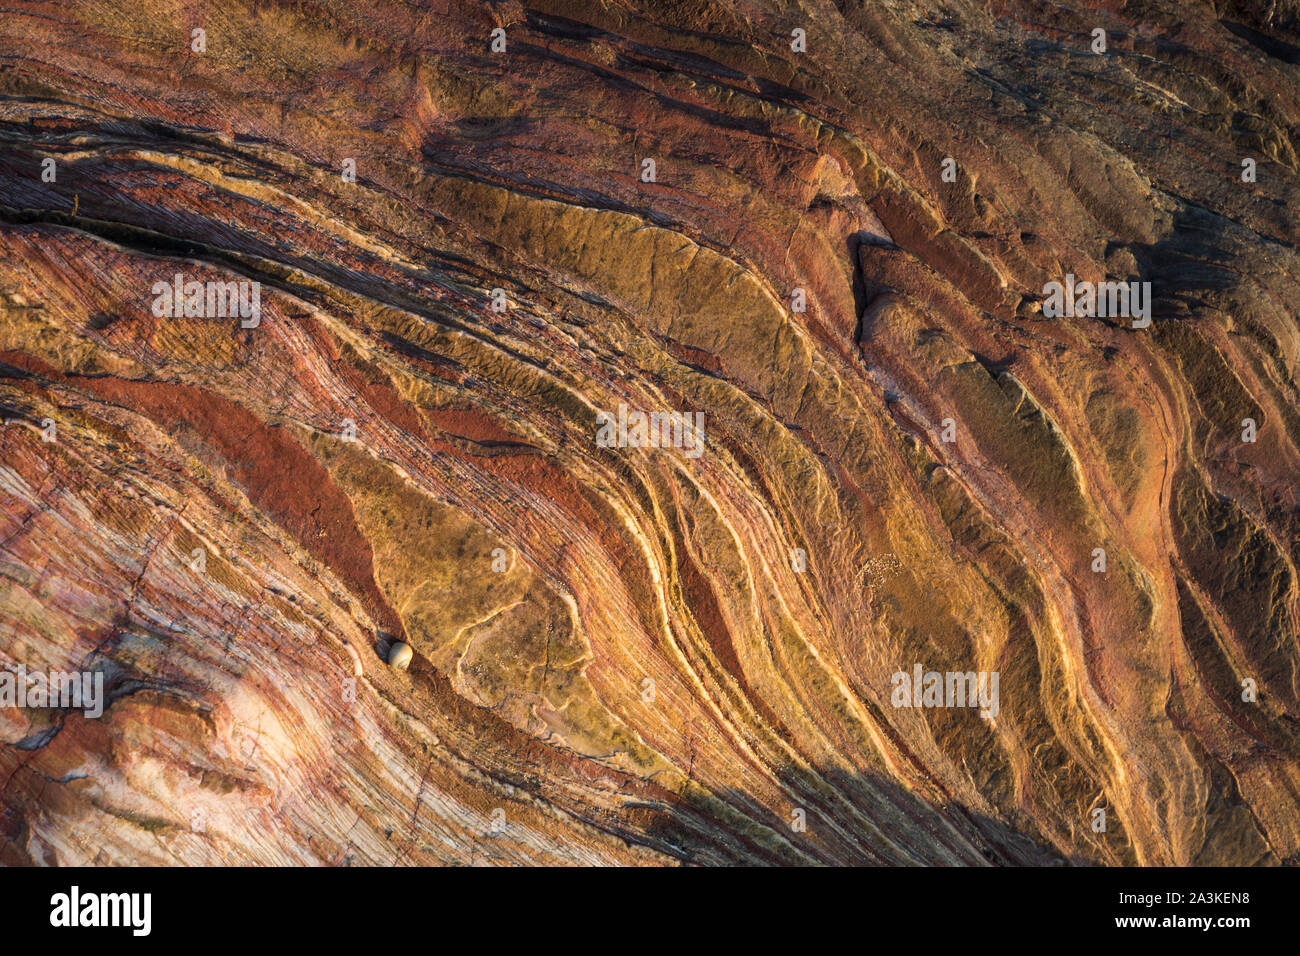 Rock textures on the beach at Kinnagoe Bay at sunrise, Inishowen Peninsula, Co Donegal, Ireland Stock Photo